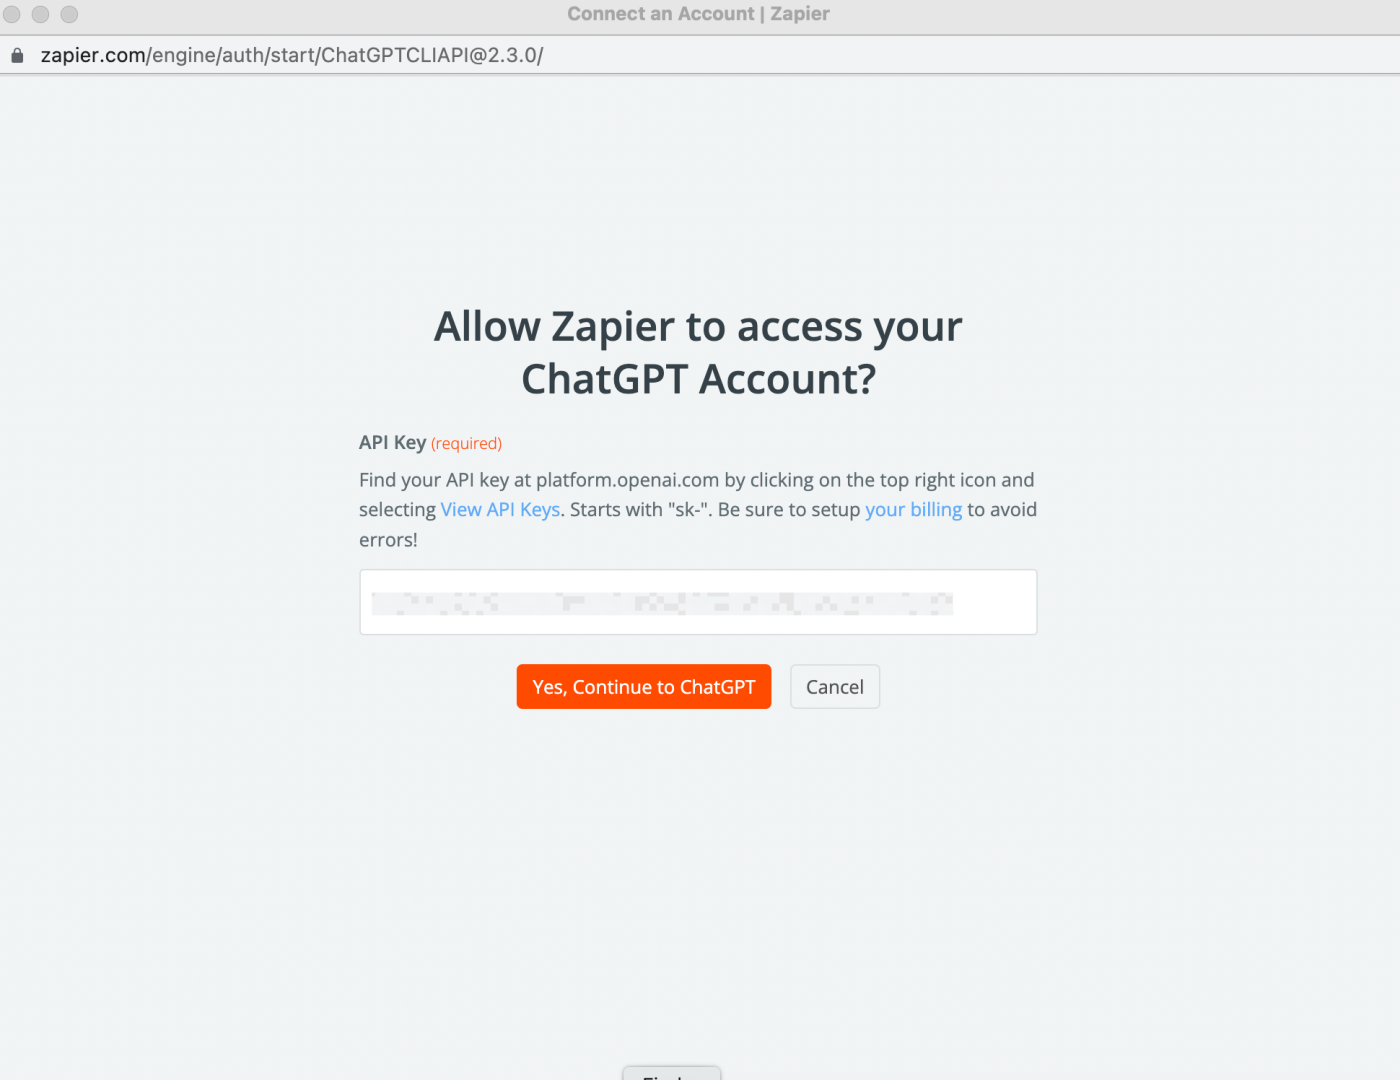 A screenshot of the popup window asking for a ChatGPT API key.